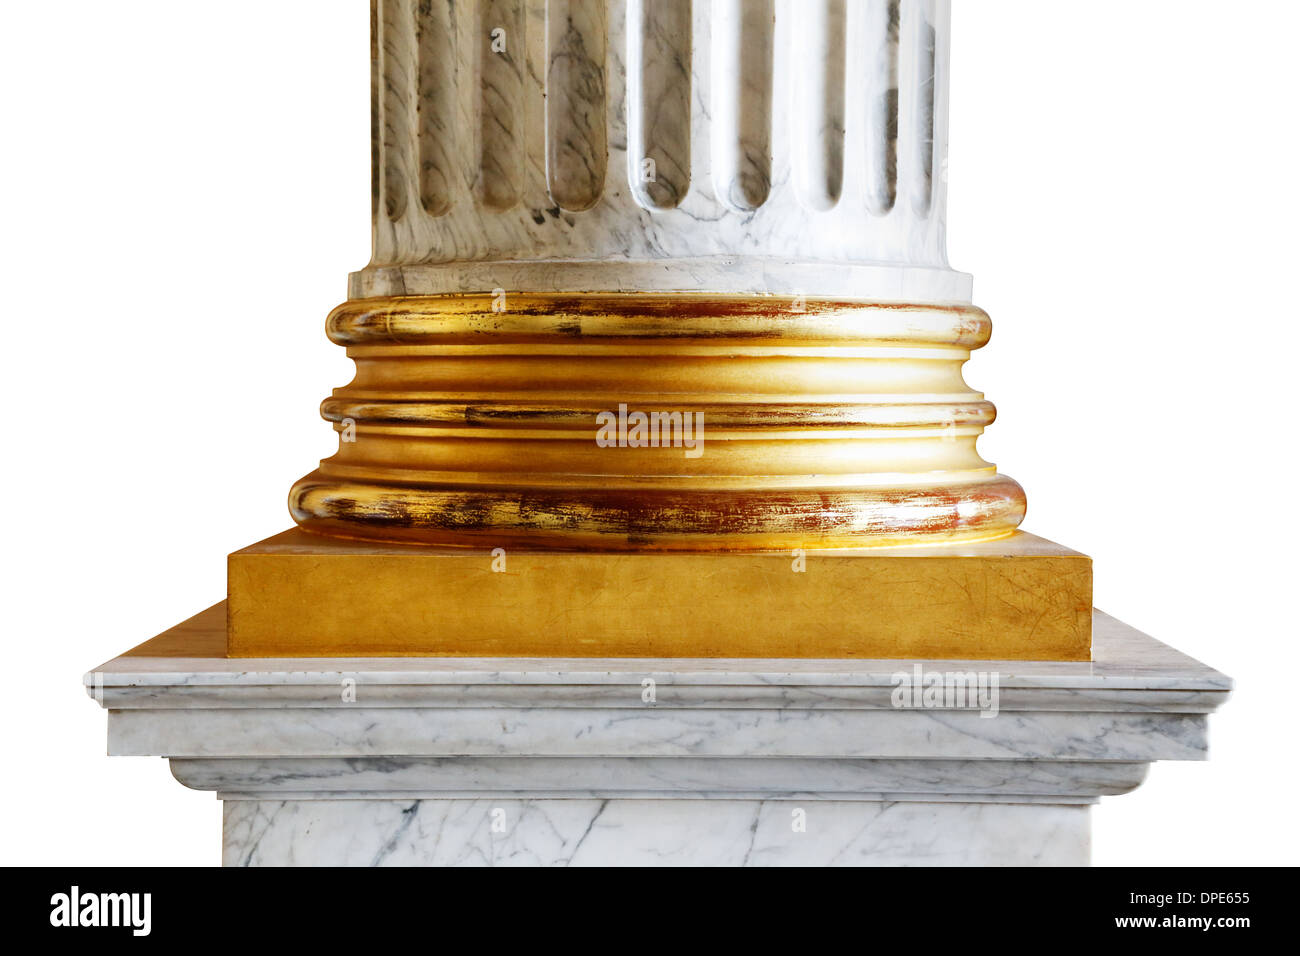 A close-up of an ancient white marble classical column with gold incrustations Stock Photo